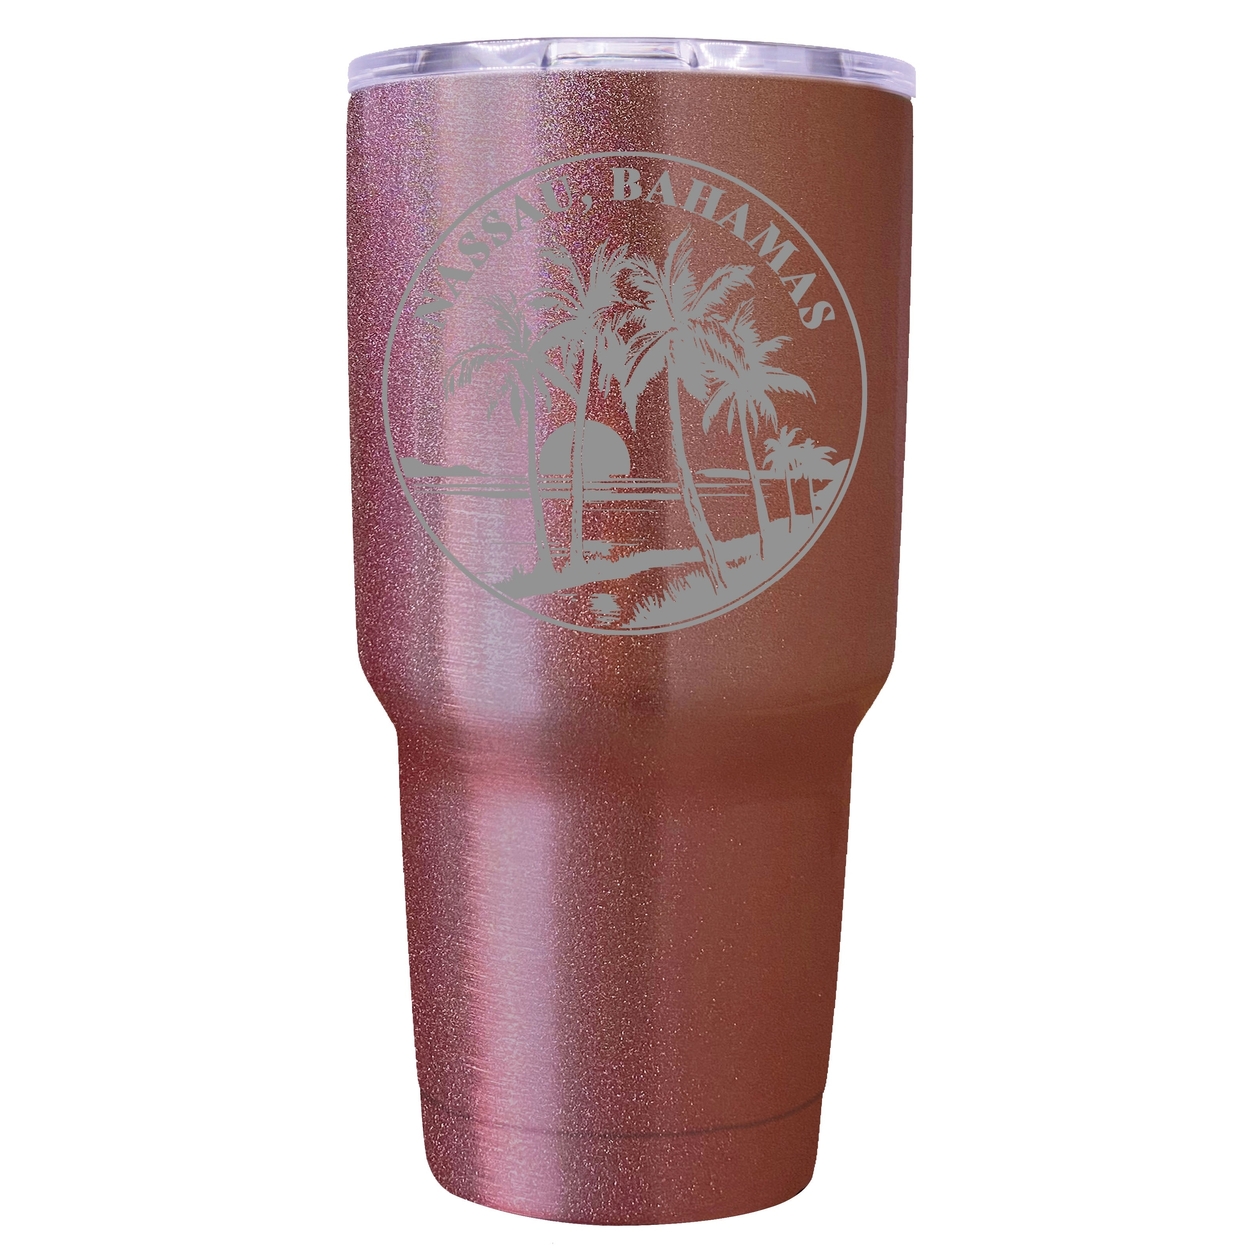 Nassau The Bahamas Souvenir 24 Oz Engraved Insulated Stainless Steel Tumbler - Rose Gold,,4-Pack